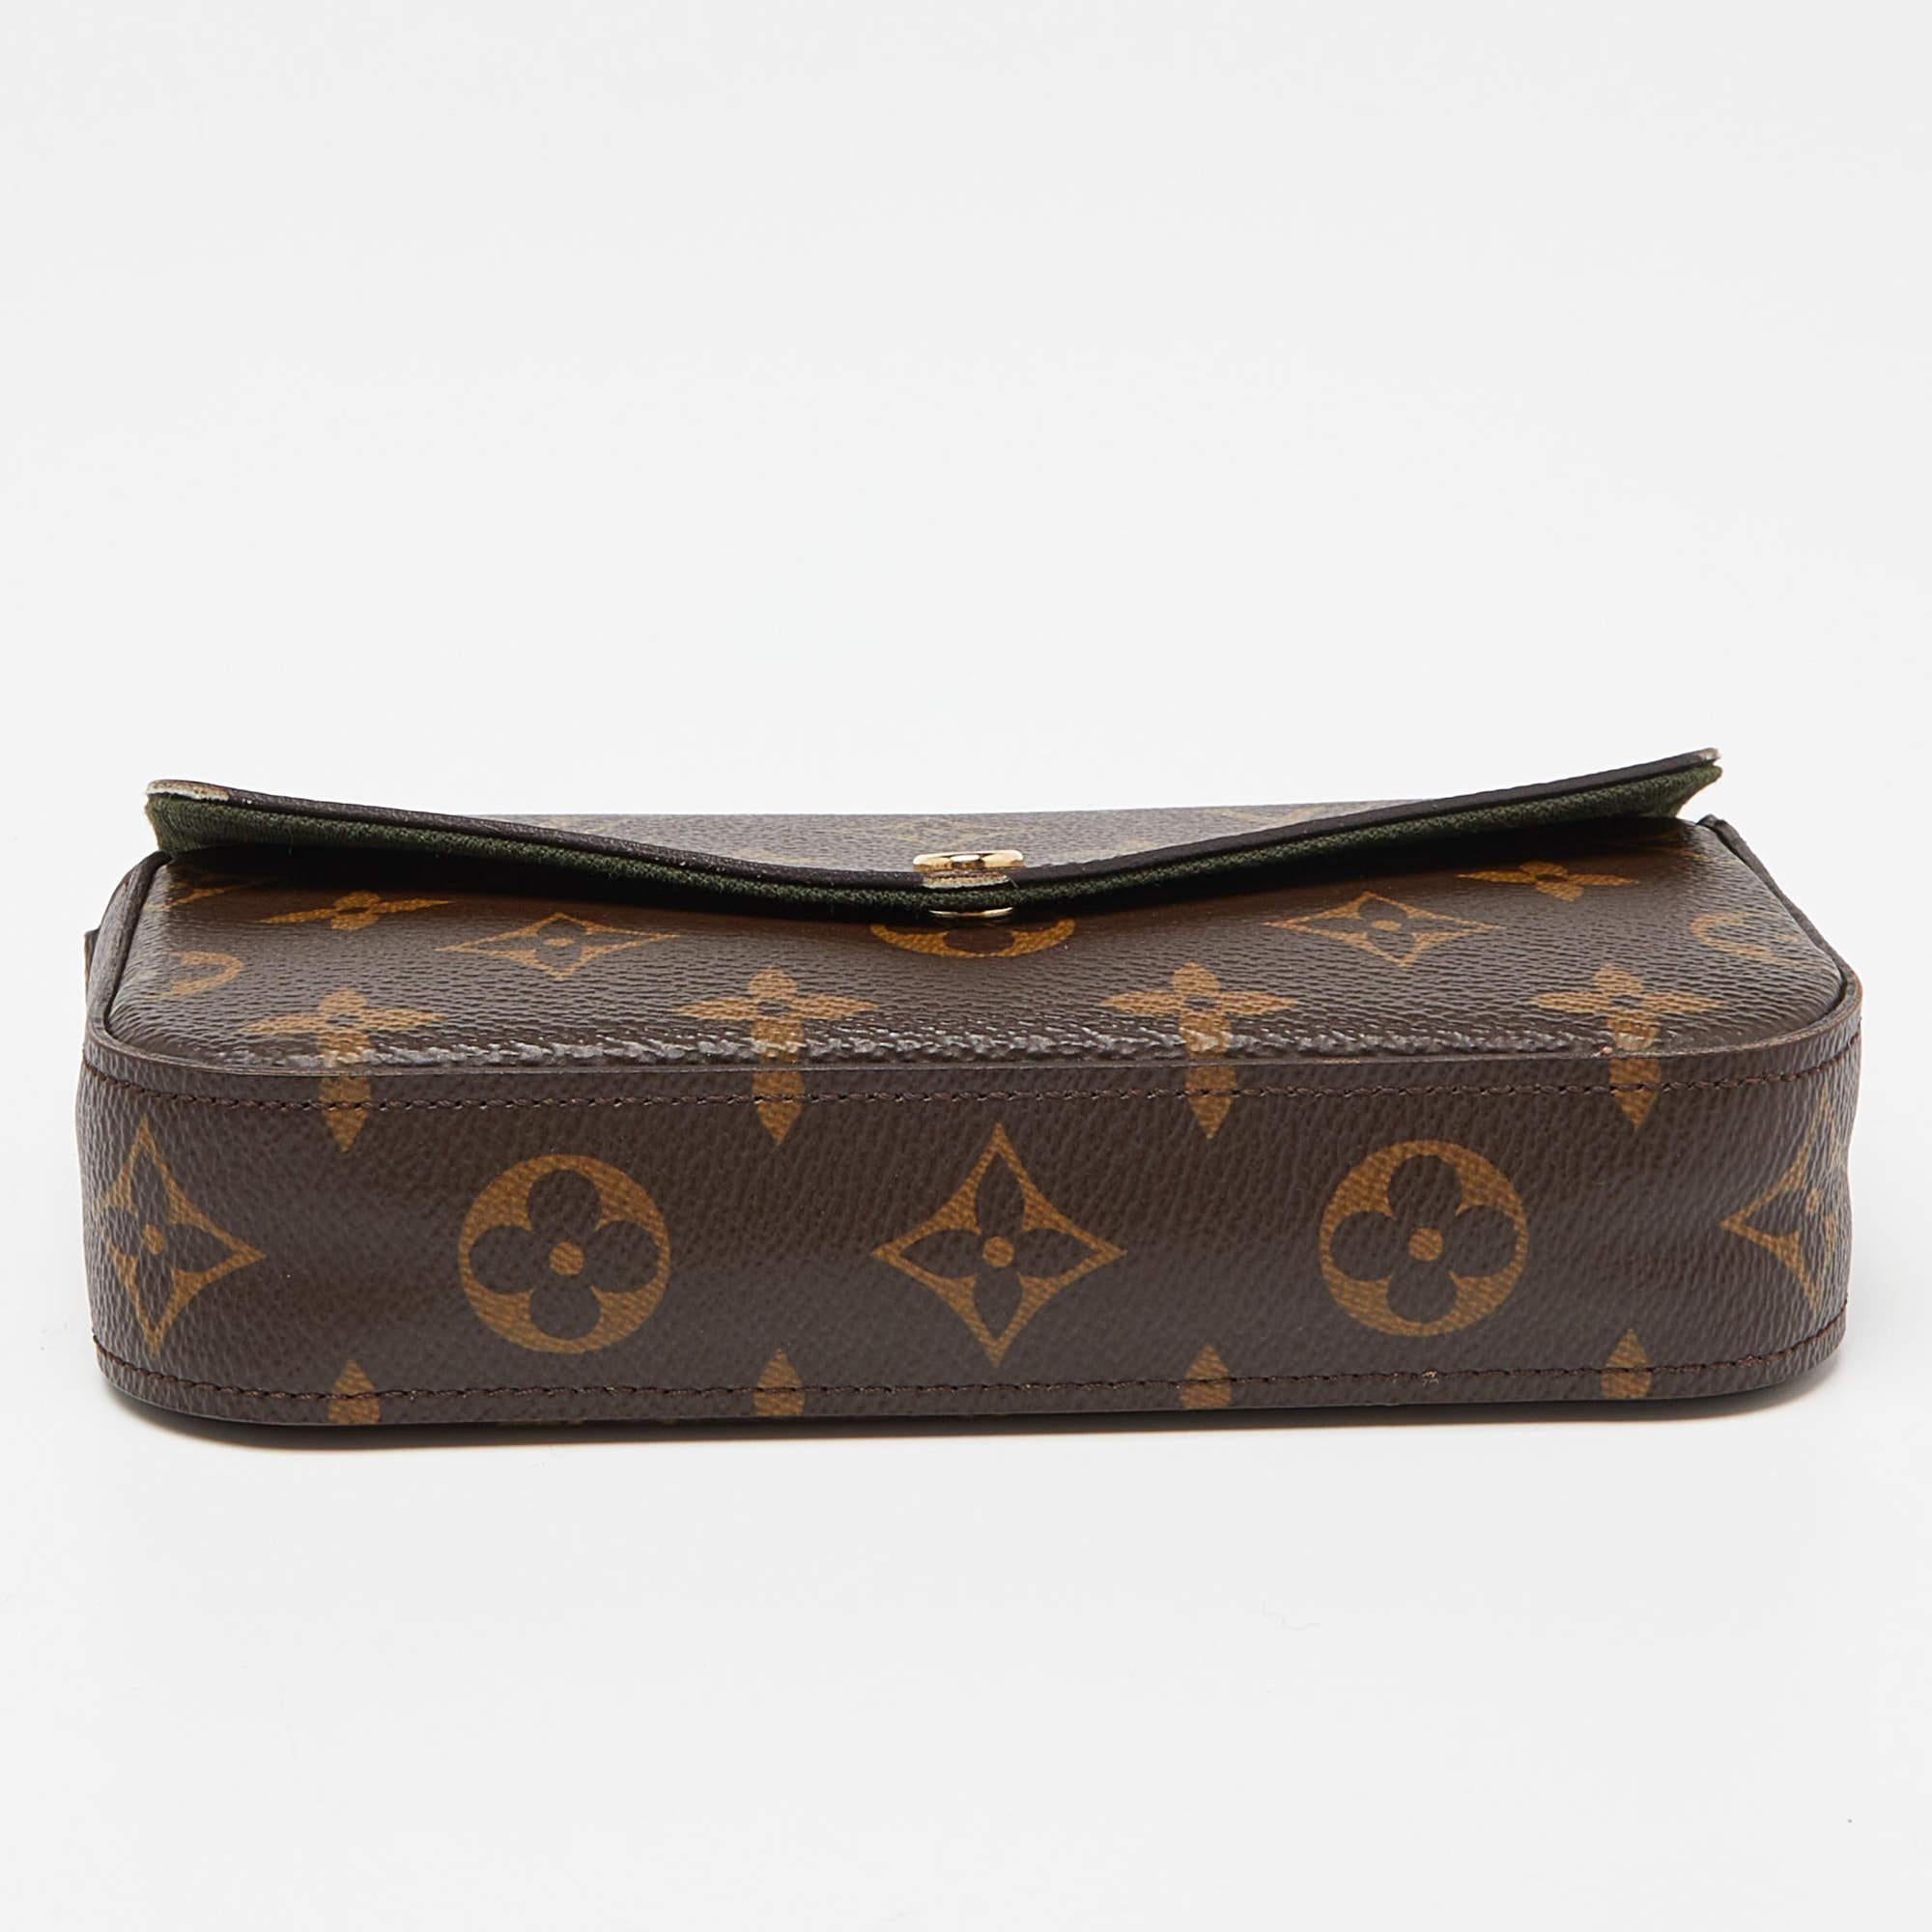 The Louis Vuitton Félicie Strap & Go Pochette has the Félicie Pochette, a jacquard strap, and a removable pouch. The design is crafted from Monogram canvas and gold-tone hardware. It can be carried as a clutch and a shoulder bag.

